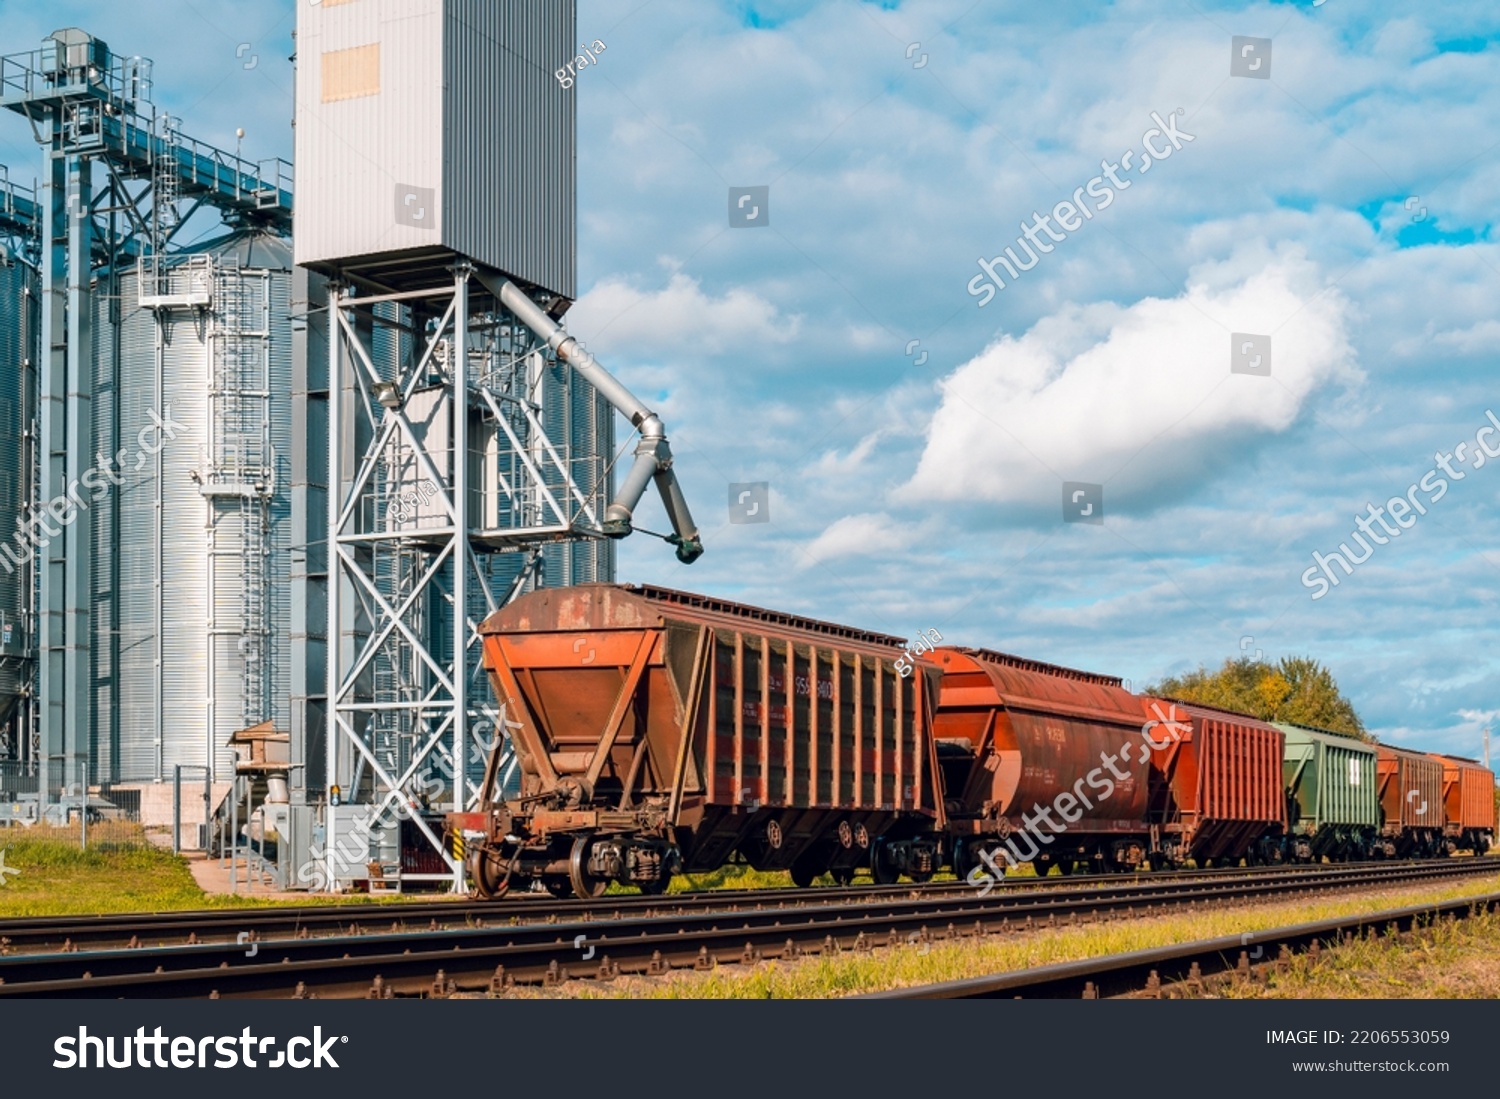 Loading railway carriages with grain at grain elevator. Grain silo, warehouse or depository is an important part of harvesting #2206553059